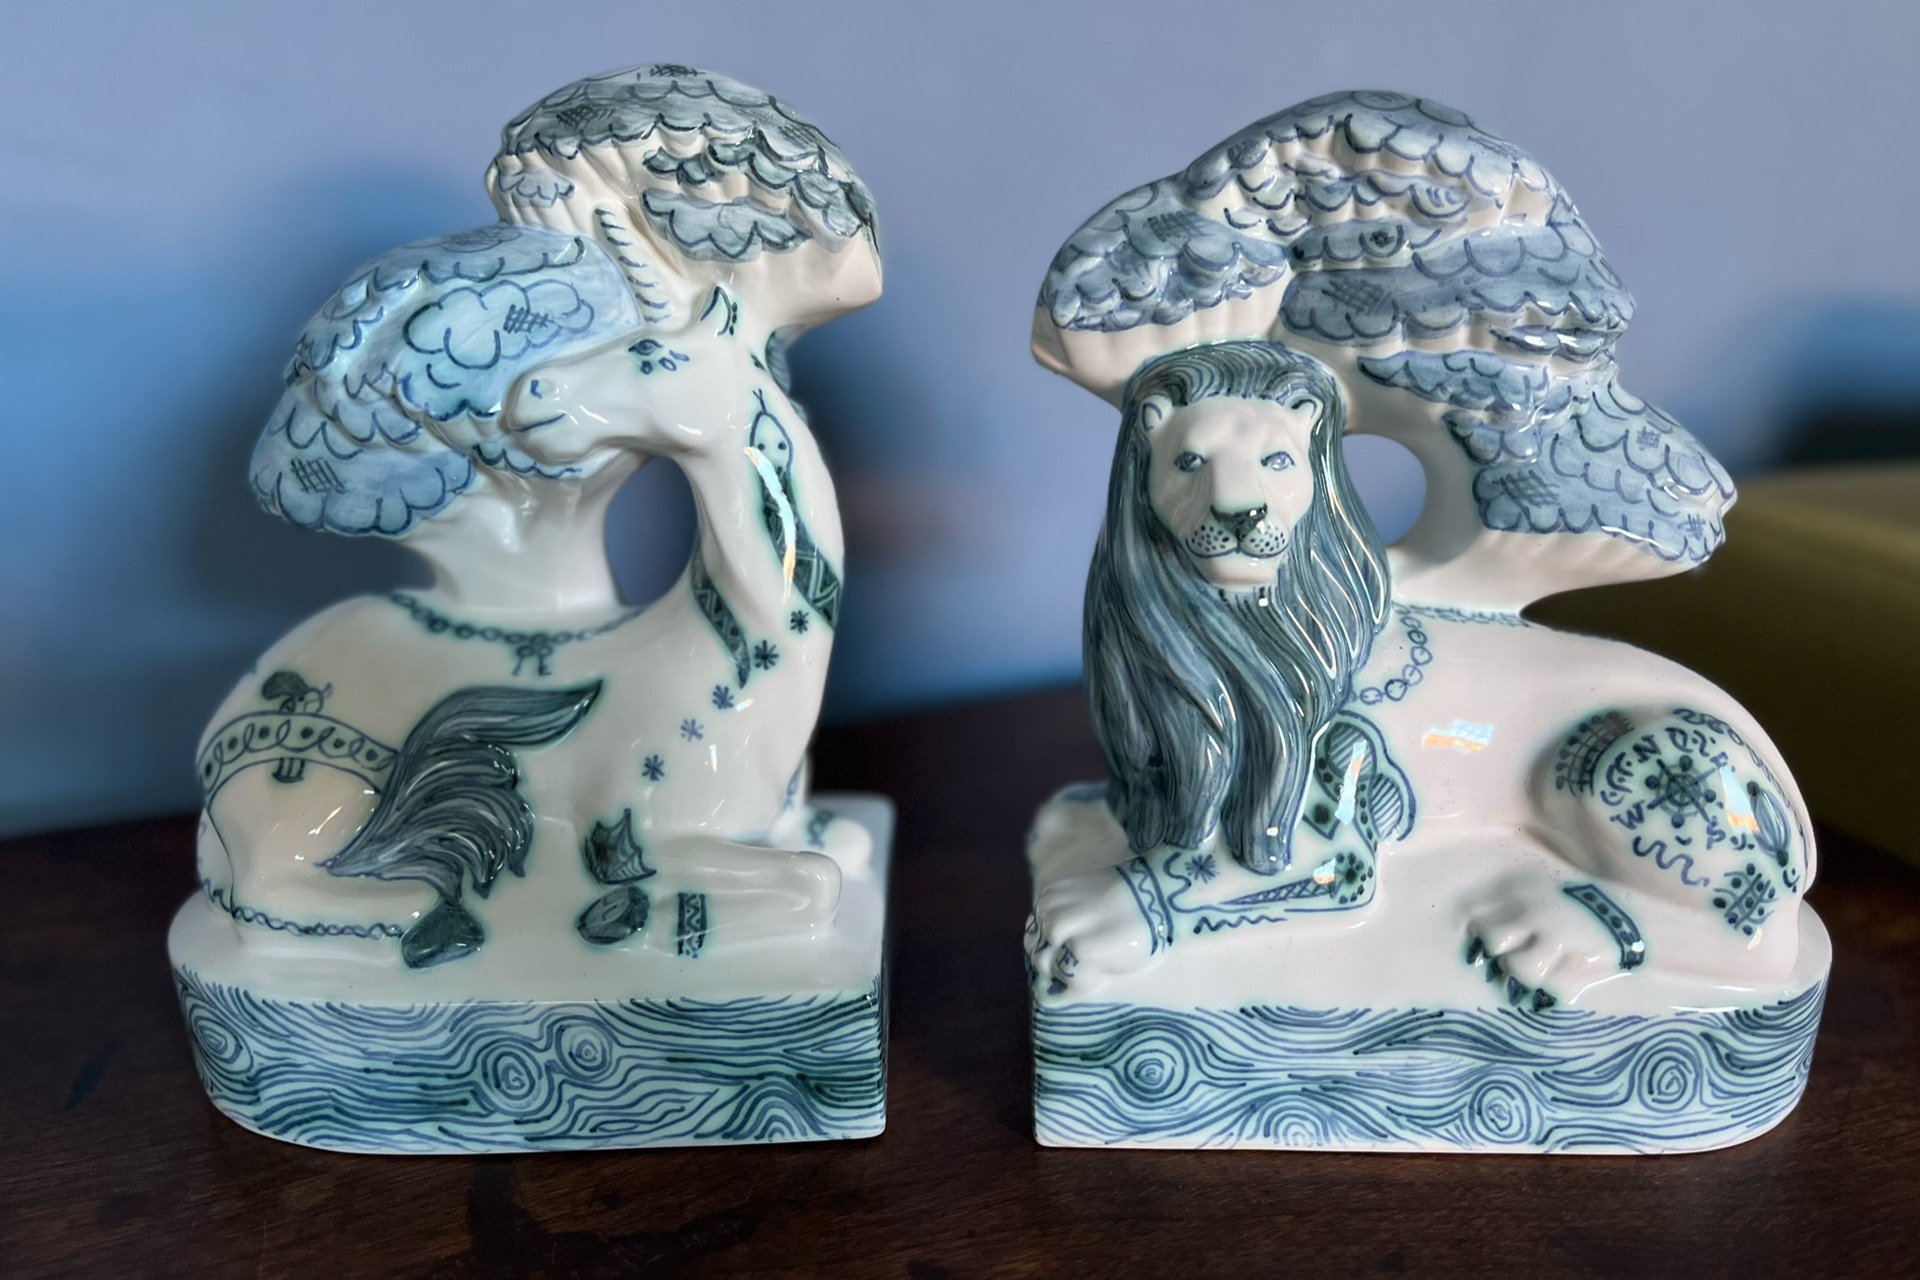 Blue and white commemorative bookends from Rye Pottery.